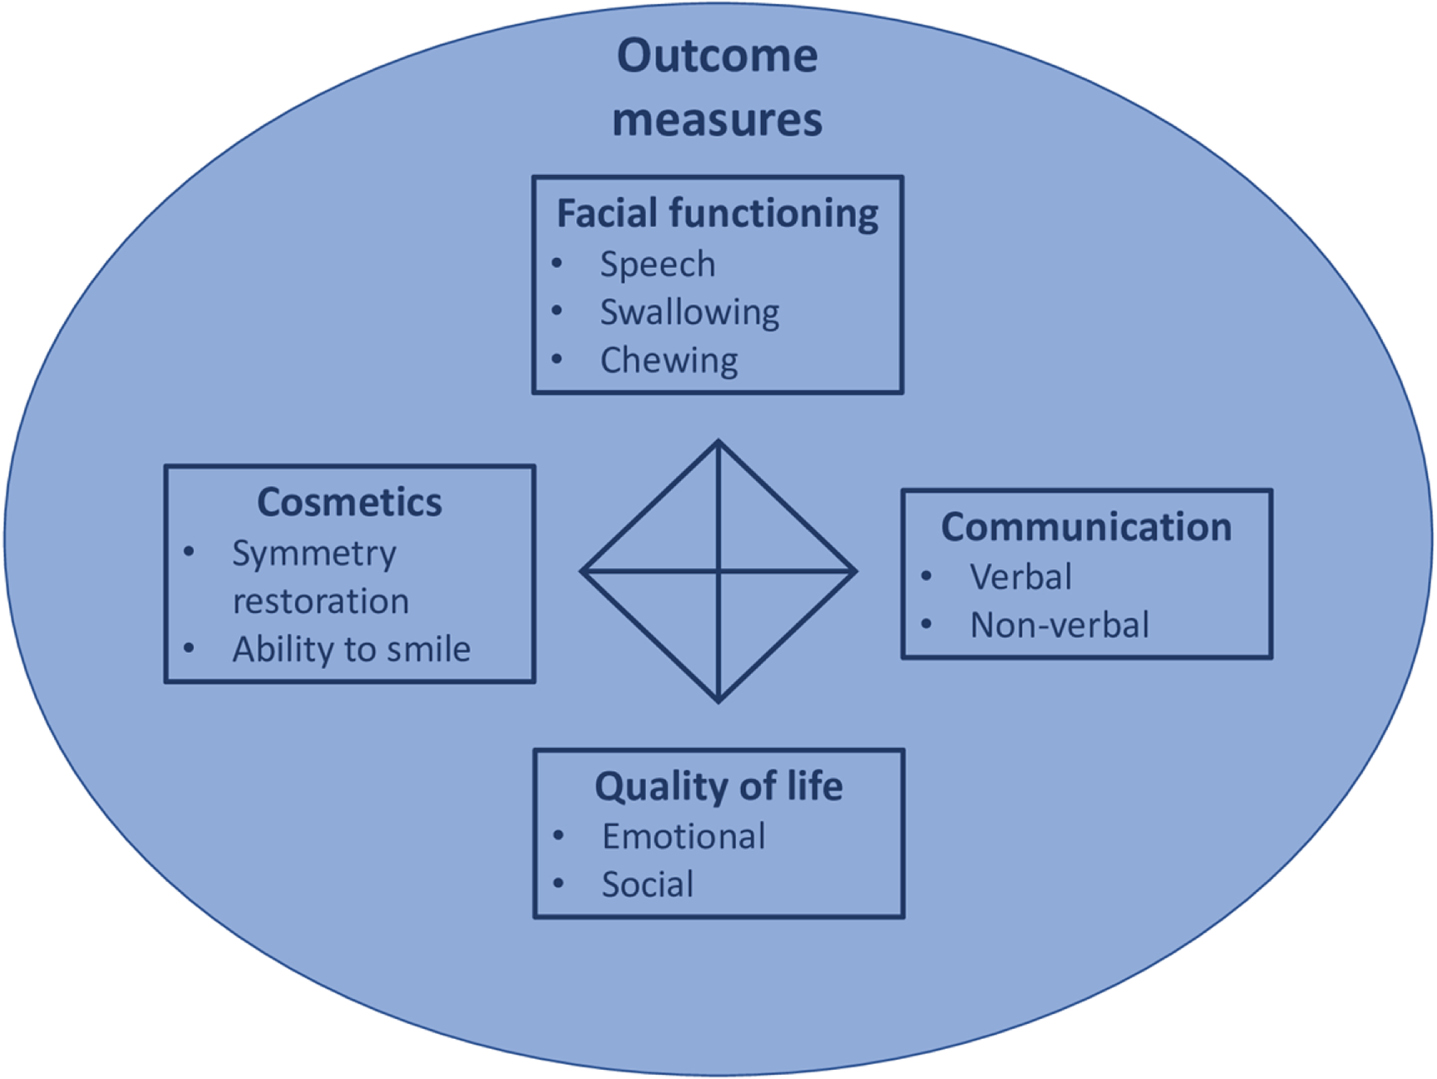 Different outcome assessment categories for assessing symptomatic treatments for improving altered facial expression. Four different outcome assessment categories: 1. facial functioning: consisting of speech, swallowing and chewing; 2. communication: consisting of verbal and non-verbal communication; 3. quality of life: consisting of emotional and social functioning; 4. cosmetics: consisting of symmetry restoration and ability to smile.